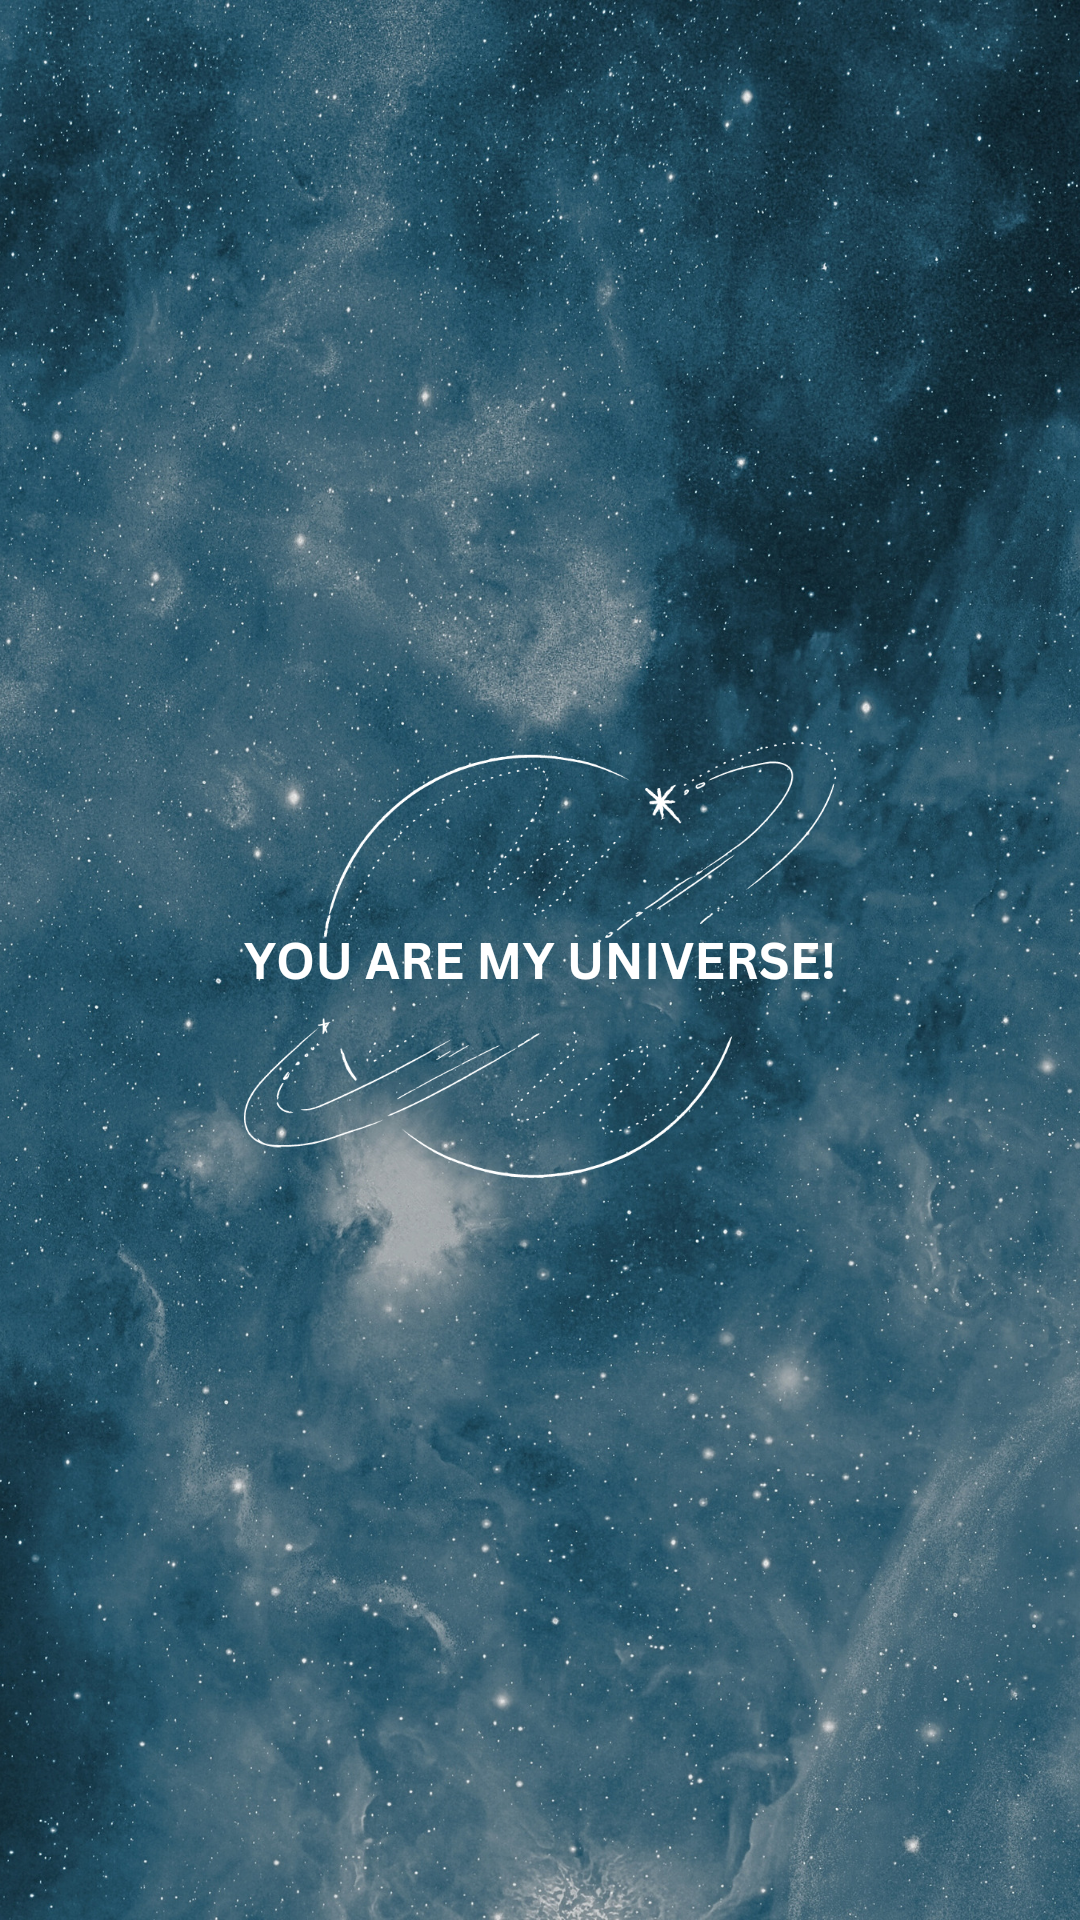 You are my universe 